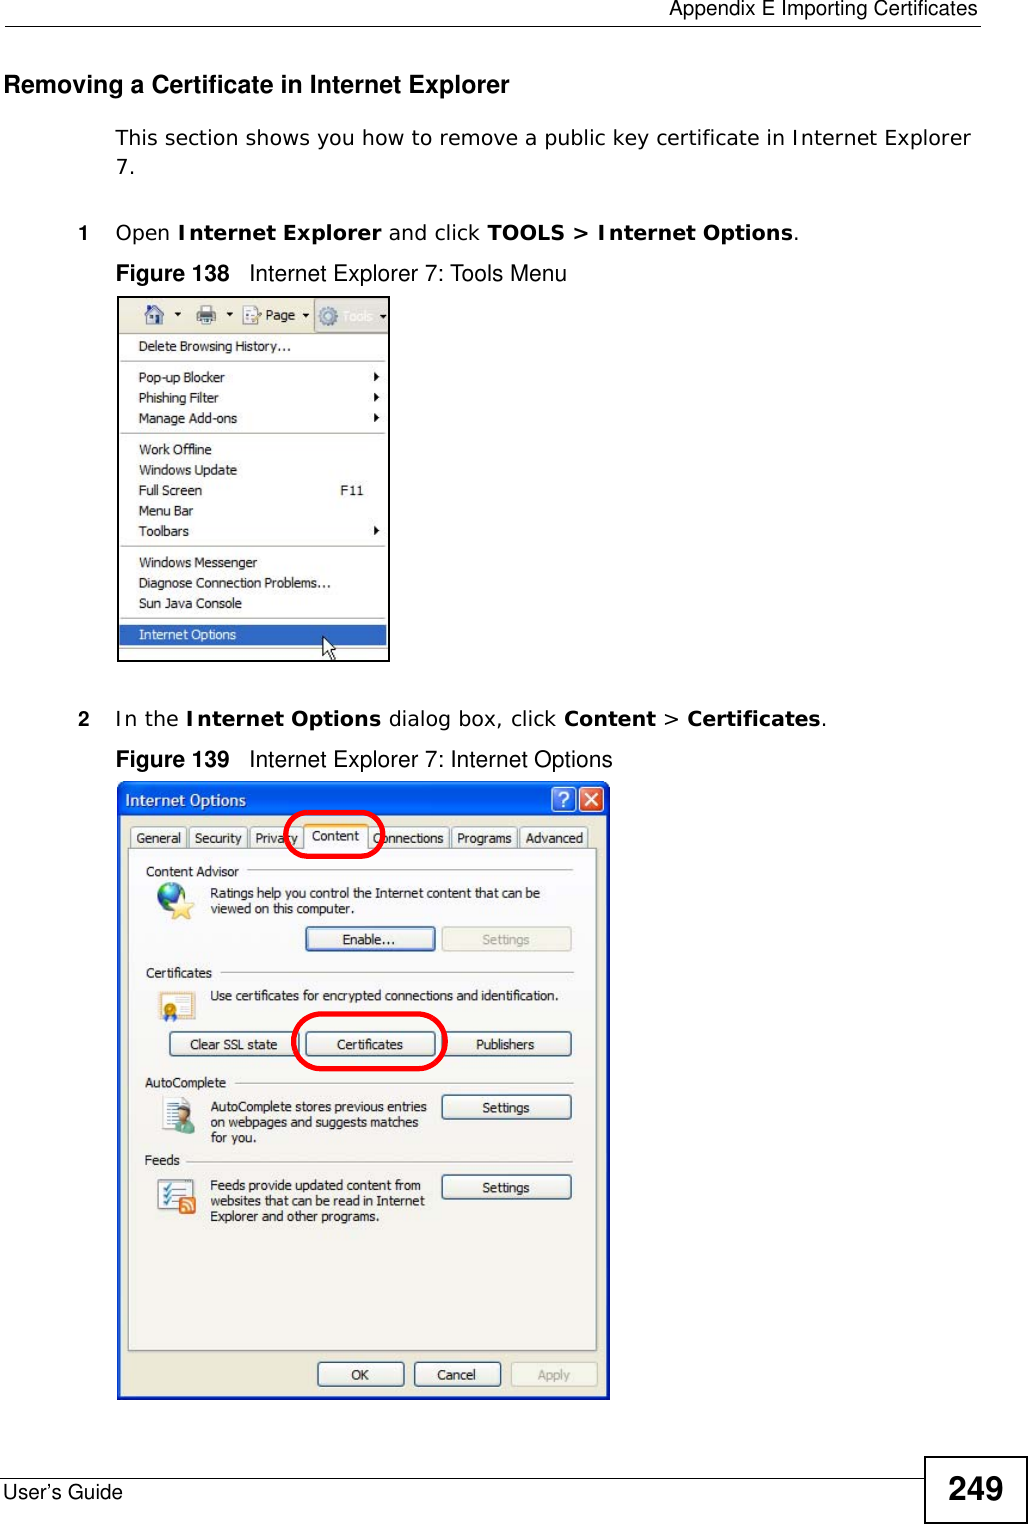  Appendix E Importing CertificatesUser’s Guide 249Removing a Certificate in Internet ExplorerThis section shows you how to remove a public key certificate in Internet Explorer 7.1Open Internet Explorer and click TOOLS &gt; Internet Options.Figure 138   Internet Explorer 7: Tools Menu2In the Internet Options dialog box, click Content &gt; Certificates.Figure 139   Internet Explorer 7: Internet Options